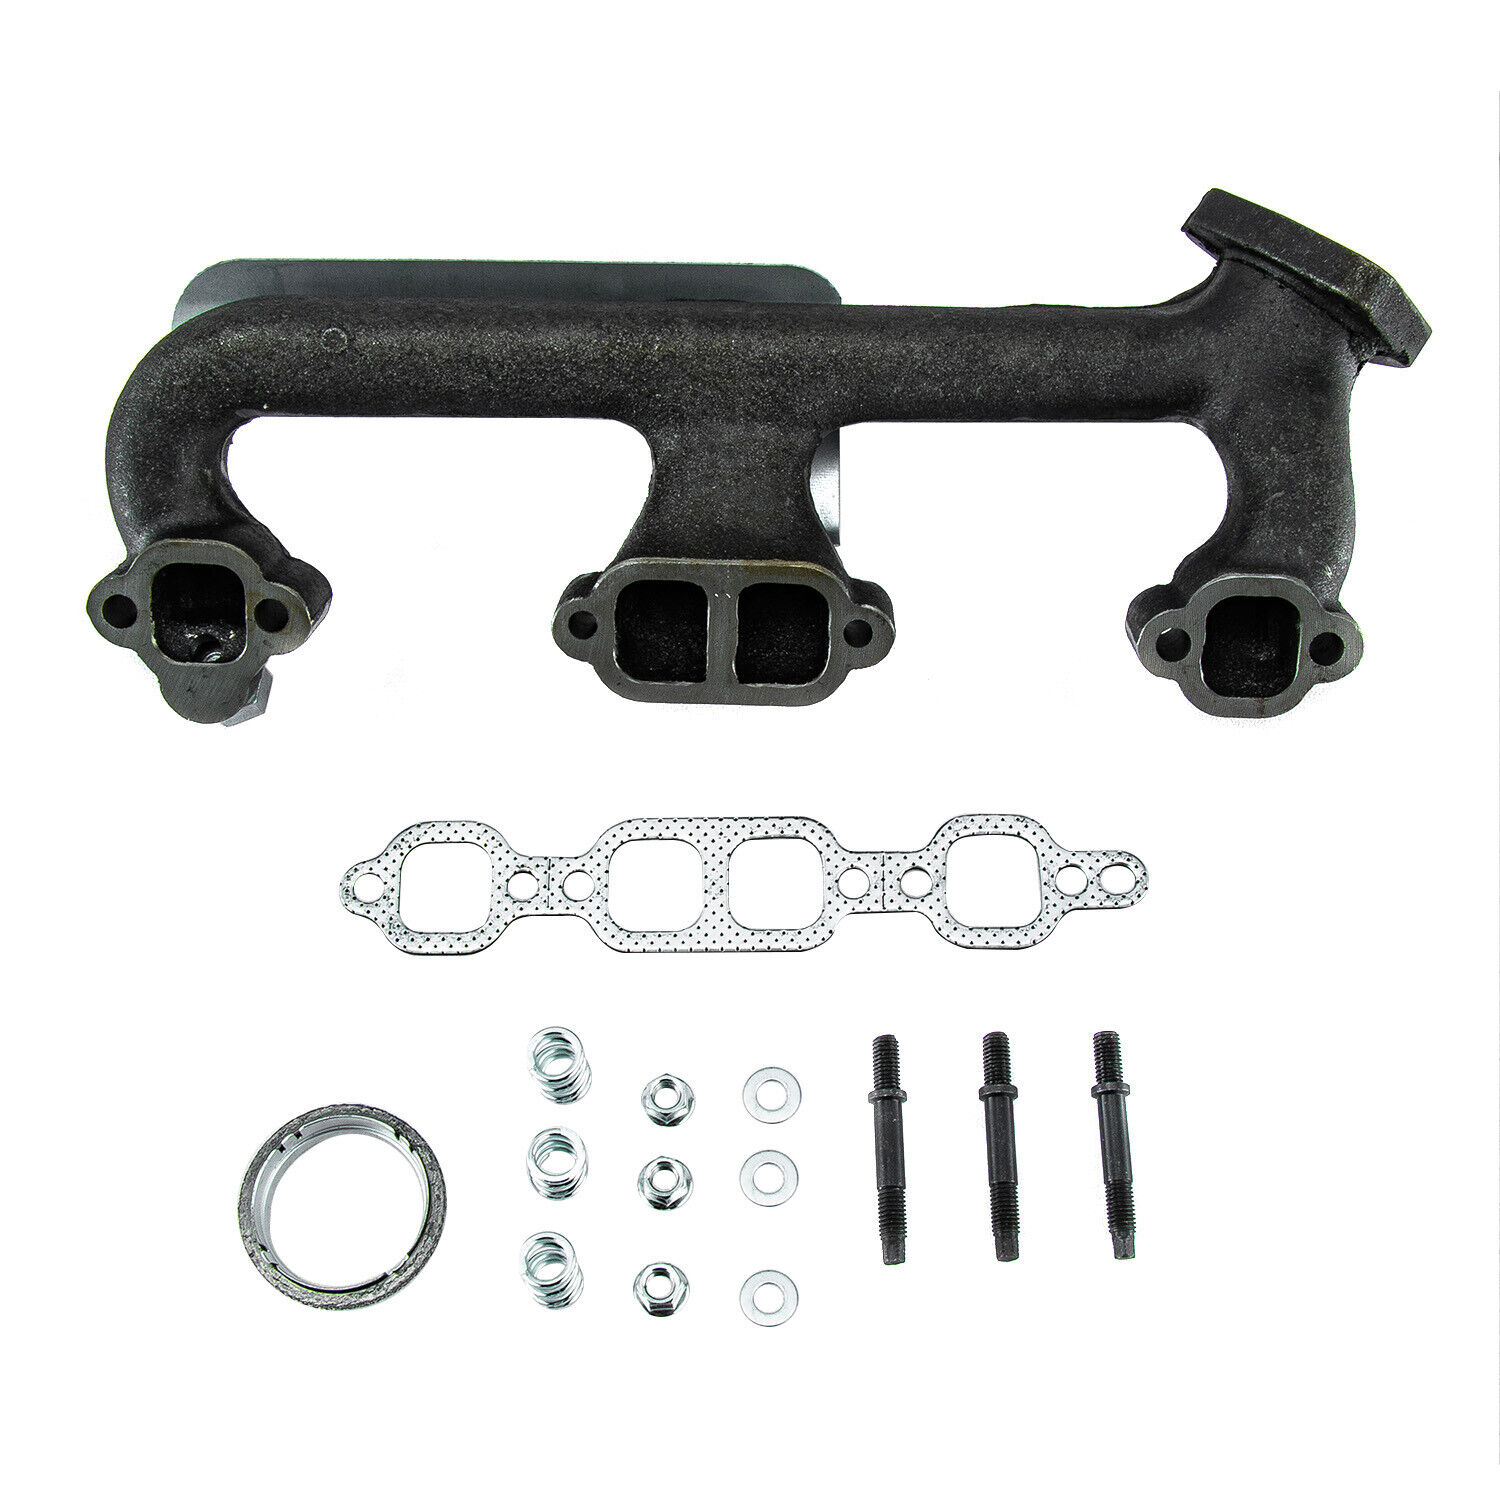 Exhaust Manifold For 1988-1995 Chevy GMC C/K 1500 2500 Pickup 350 305 5.0L 5.7L